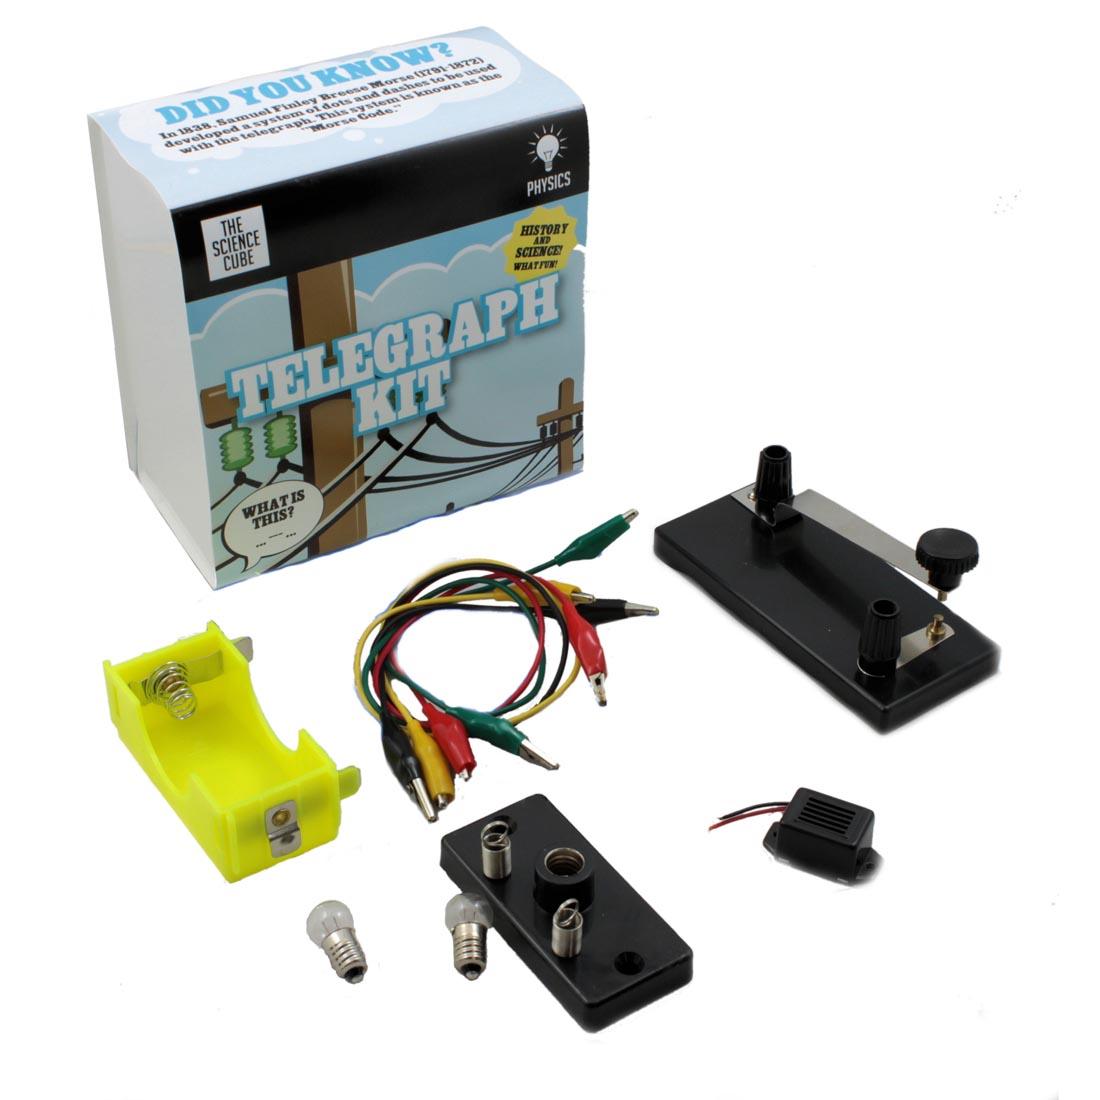 The Science Cube Telegraph Kit components shown outside the box